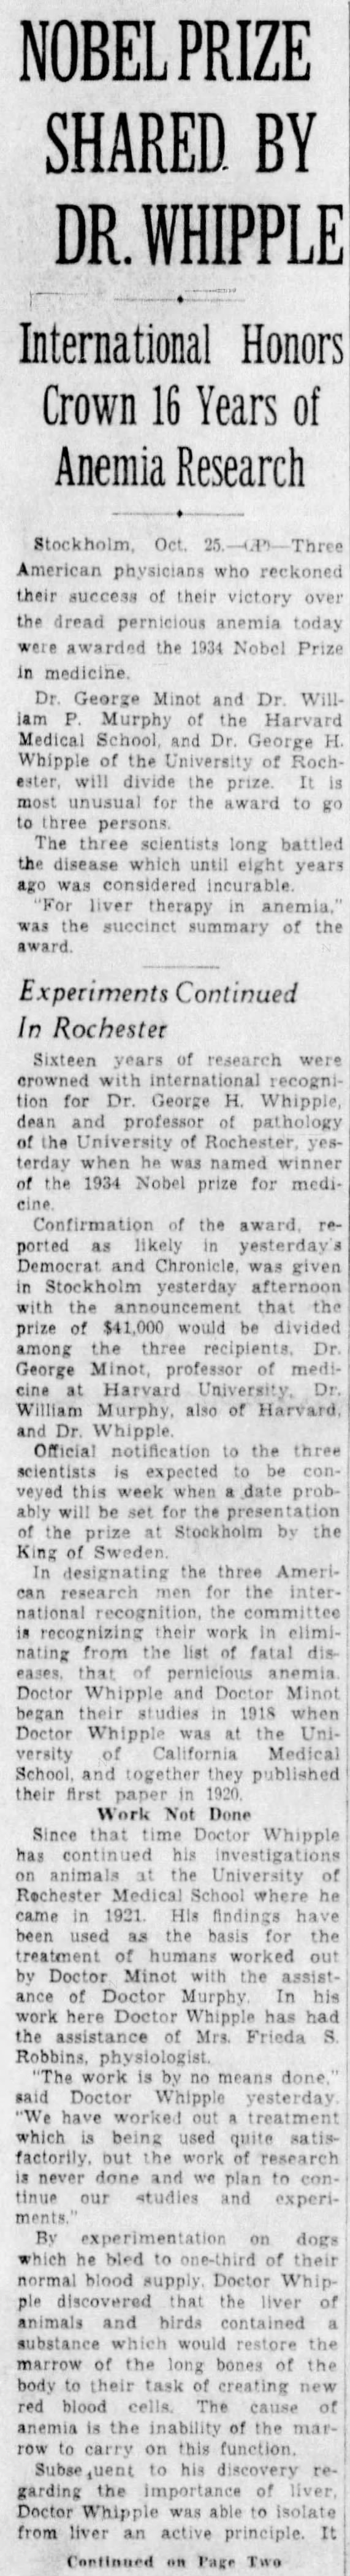 Nobel Prize Shared by Dr. Whipple